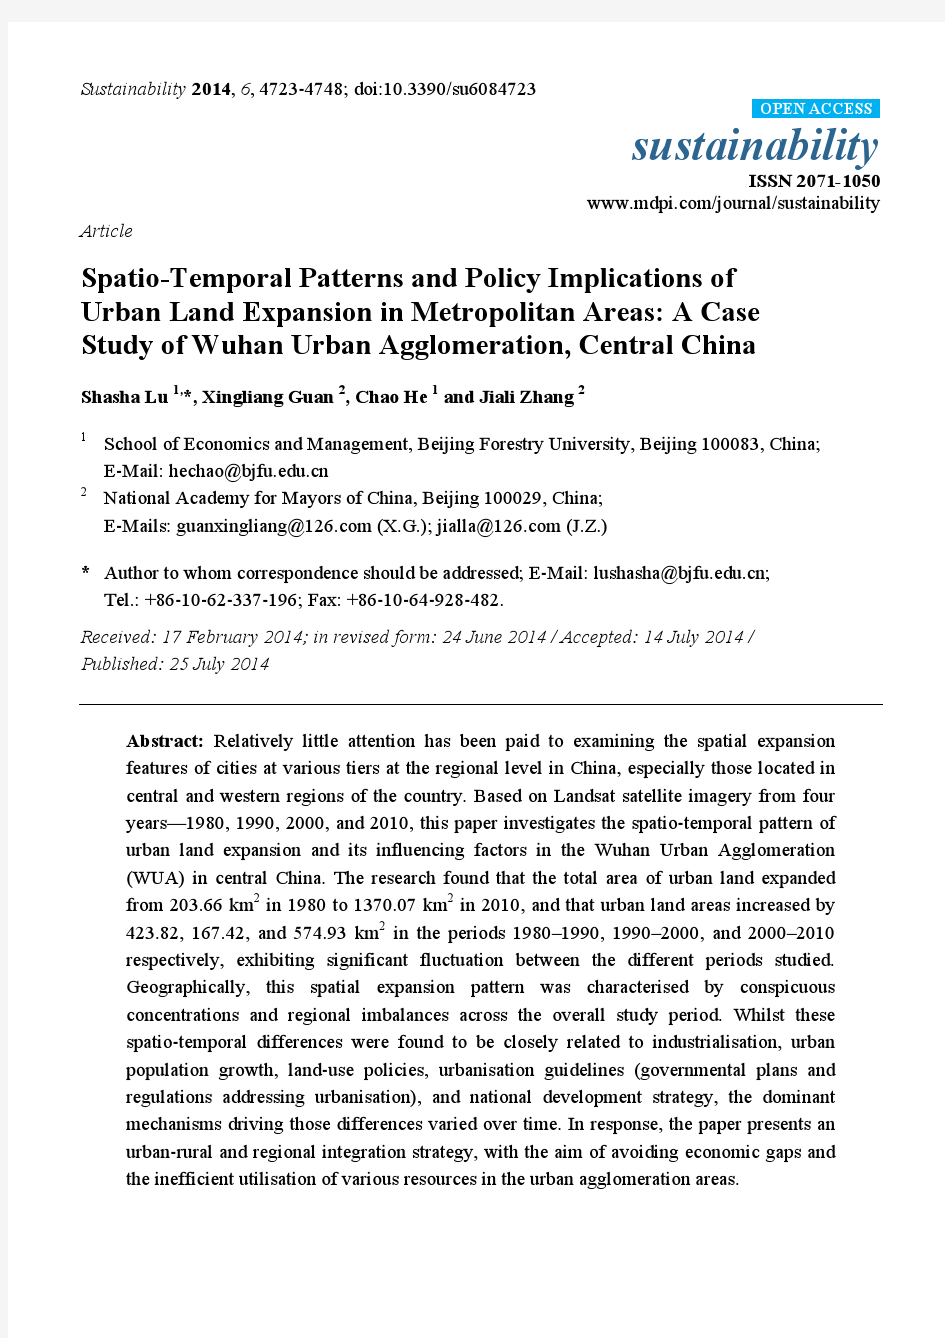 Spatio-Temporal Patterns and Policy Implications of